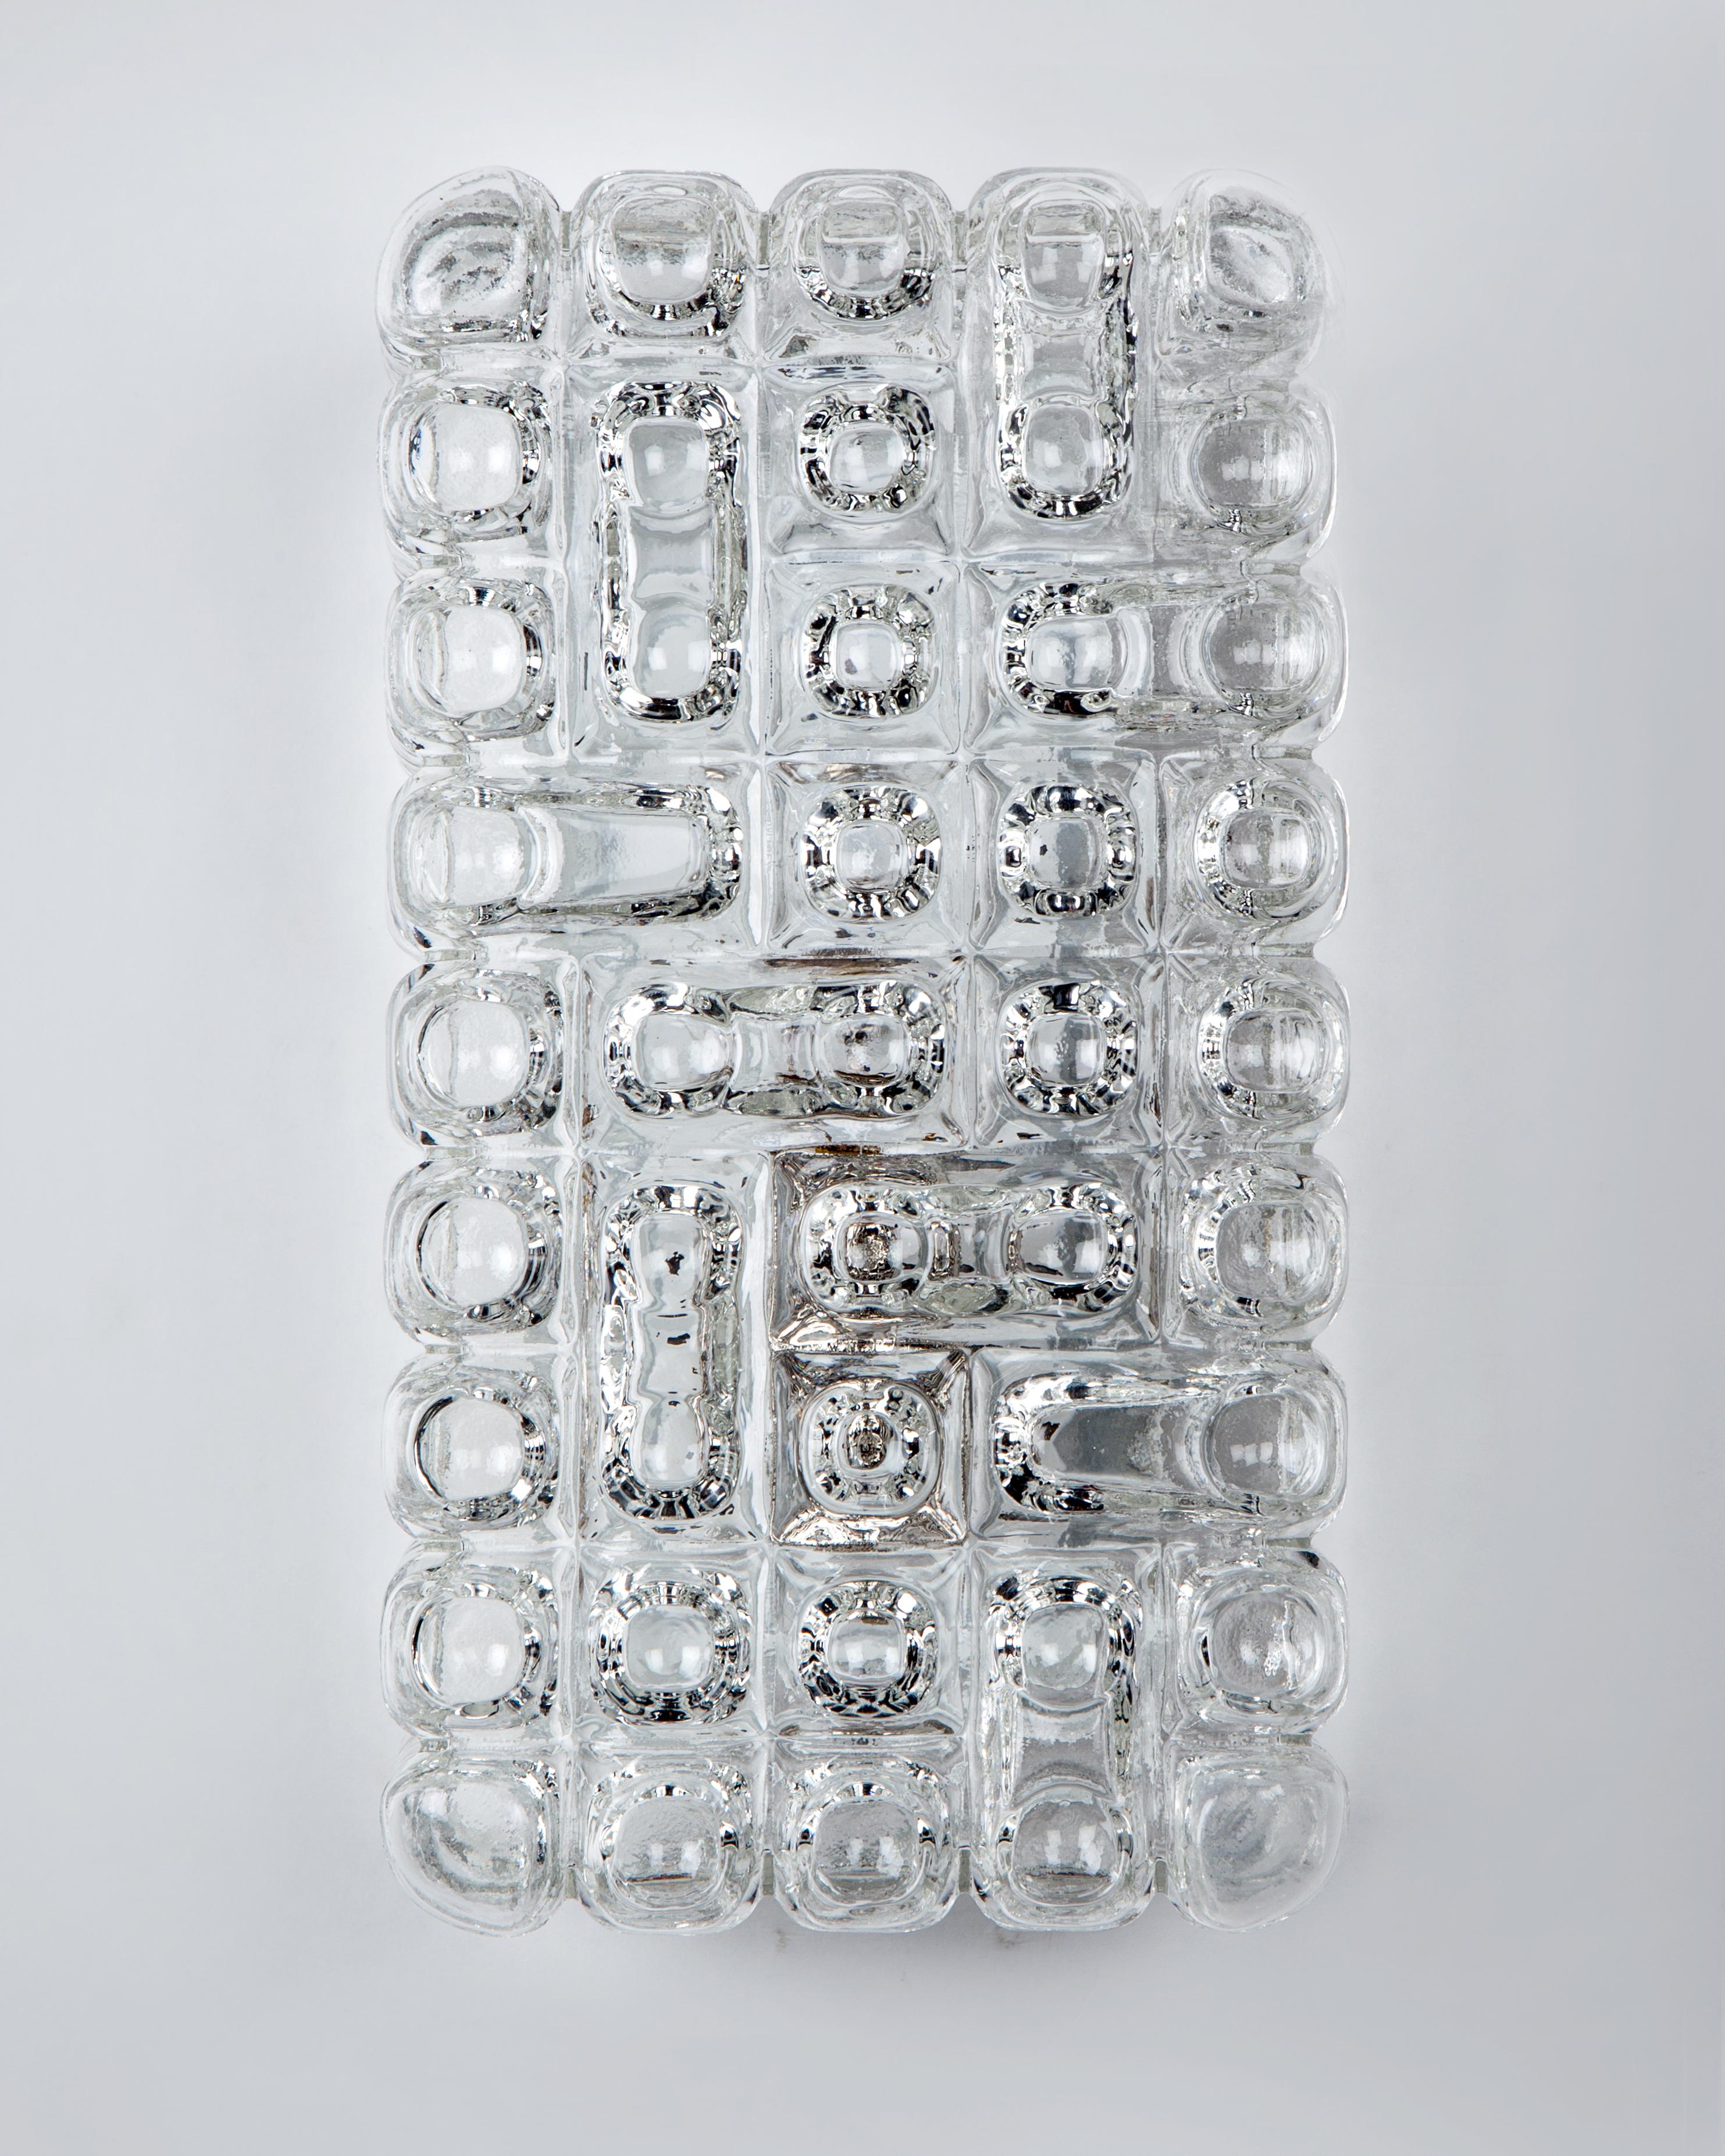 AIS2978

A pair of rectangular sconces with thick bubble patterned glass on white lacquered frames, circa 1970. Due to the antique nature of this fixture, there may be some nicks or imperfections in the glass.

Dimensions:
Overall: 9